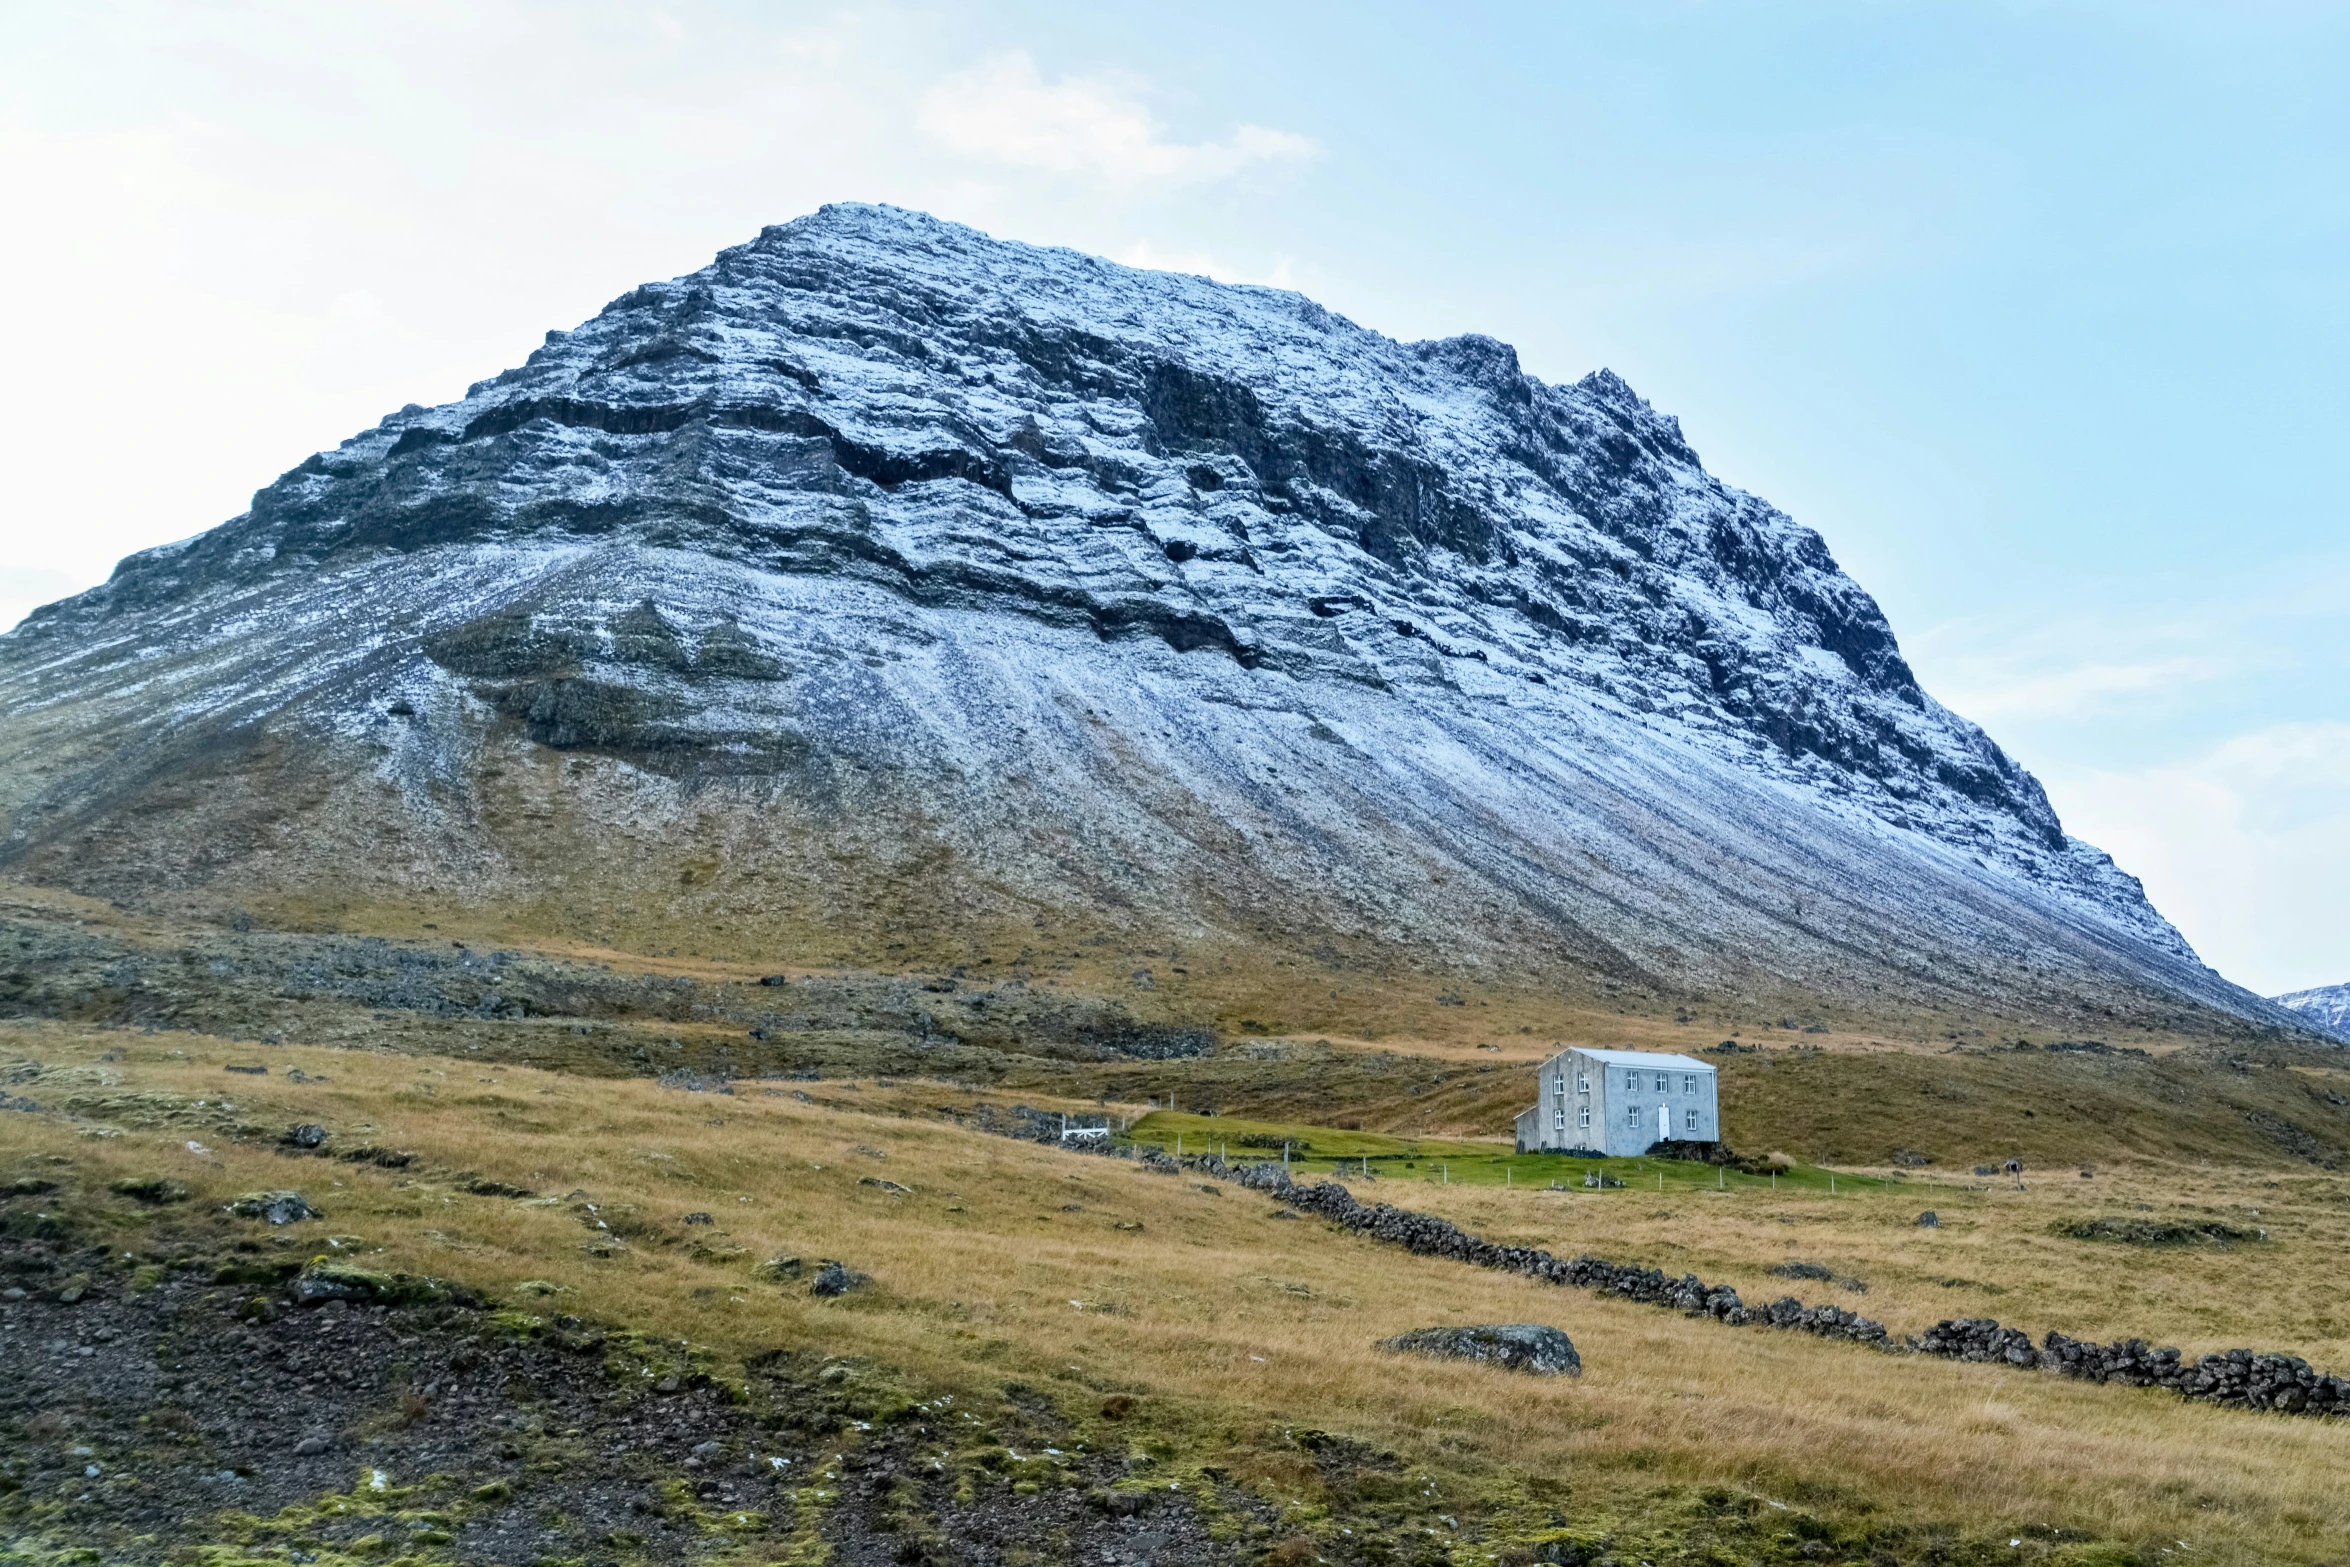 an image of a house that is next to the mountain